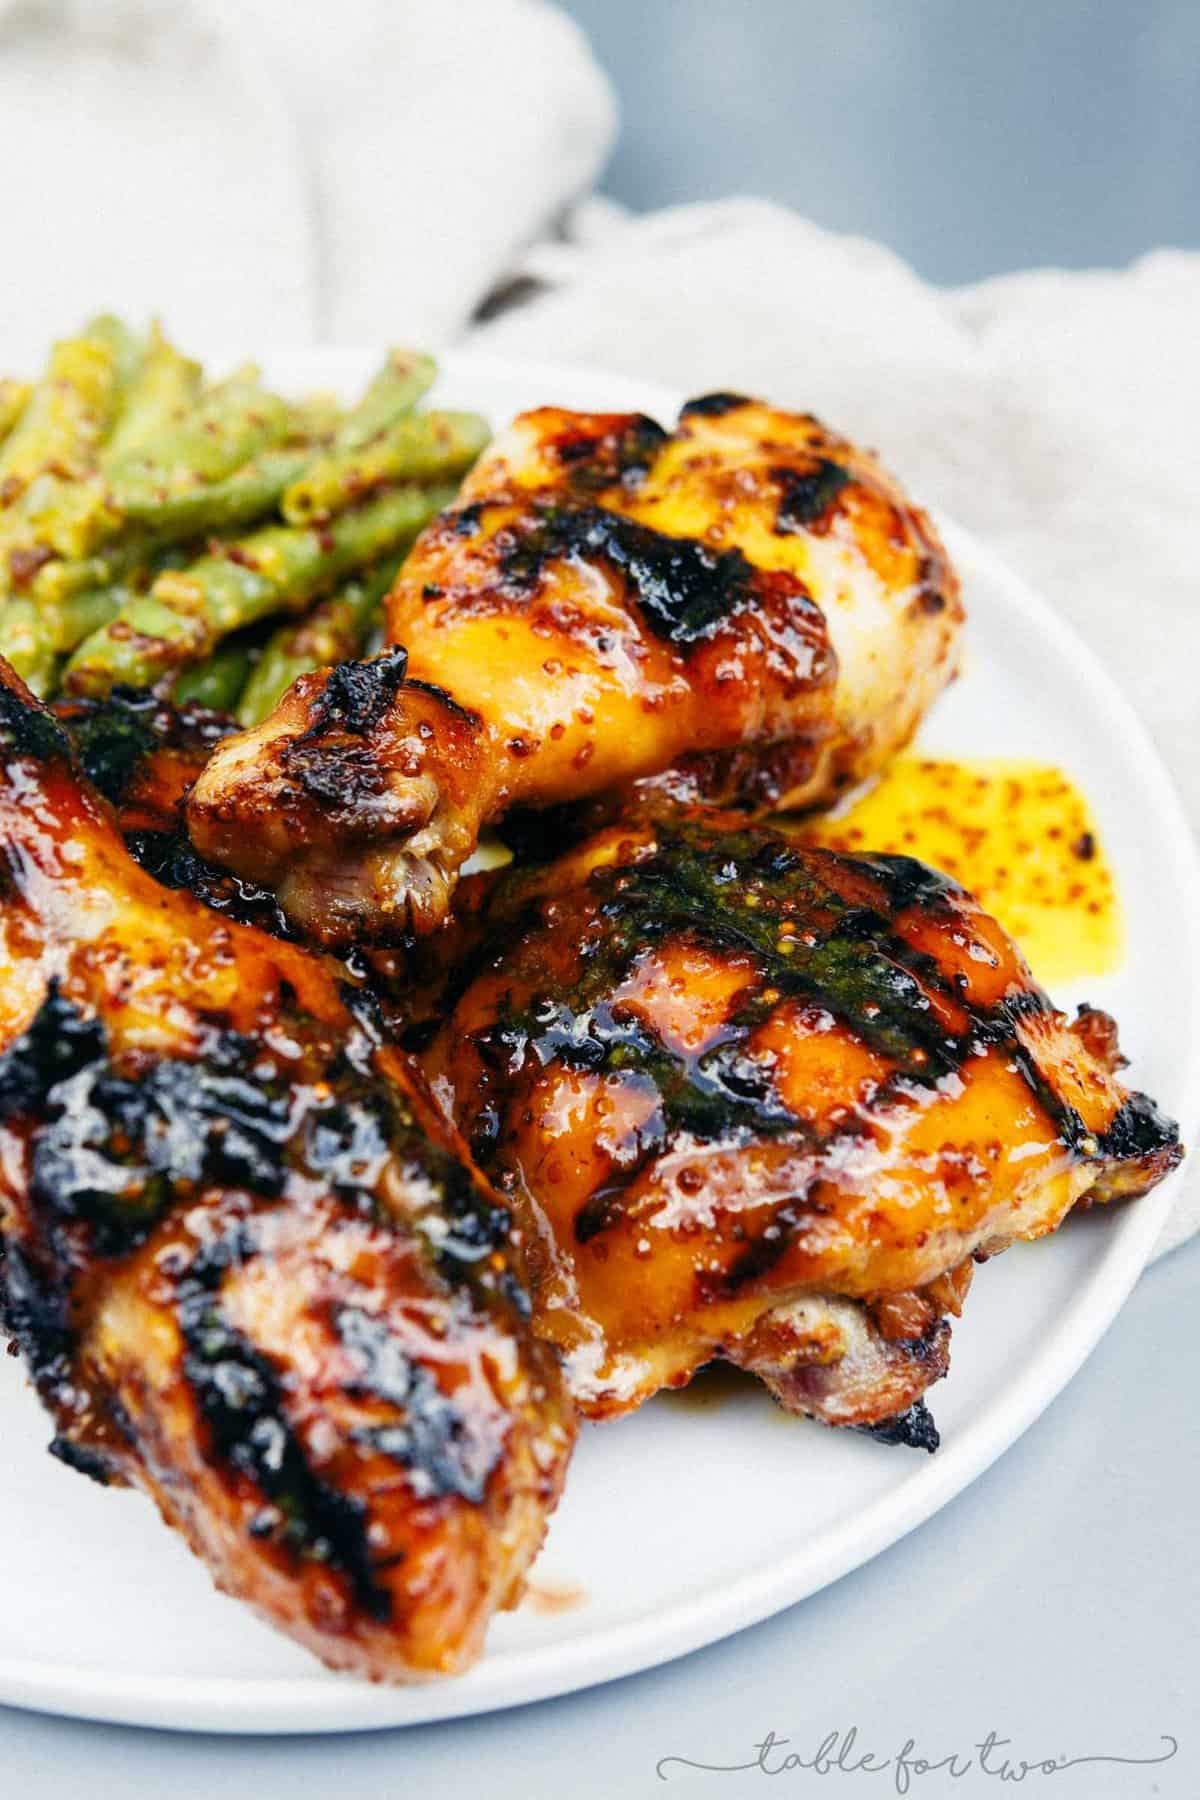 If you're looking for a quick and easy, and most importantly FAMILY-FRIENDLY weeknight meal, this honey mustard chicken with green beans is calling your name. Marinade the chicken all day while you're at work and the kids are at school and throw the chicken on the grill or in the oven when you get home! Dinner was practically made for you while you were away! The sauce is INCREDIBLE!!!